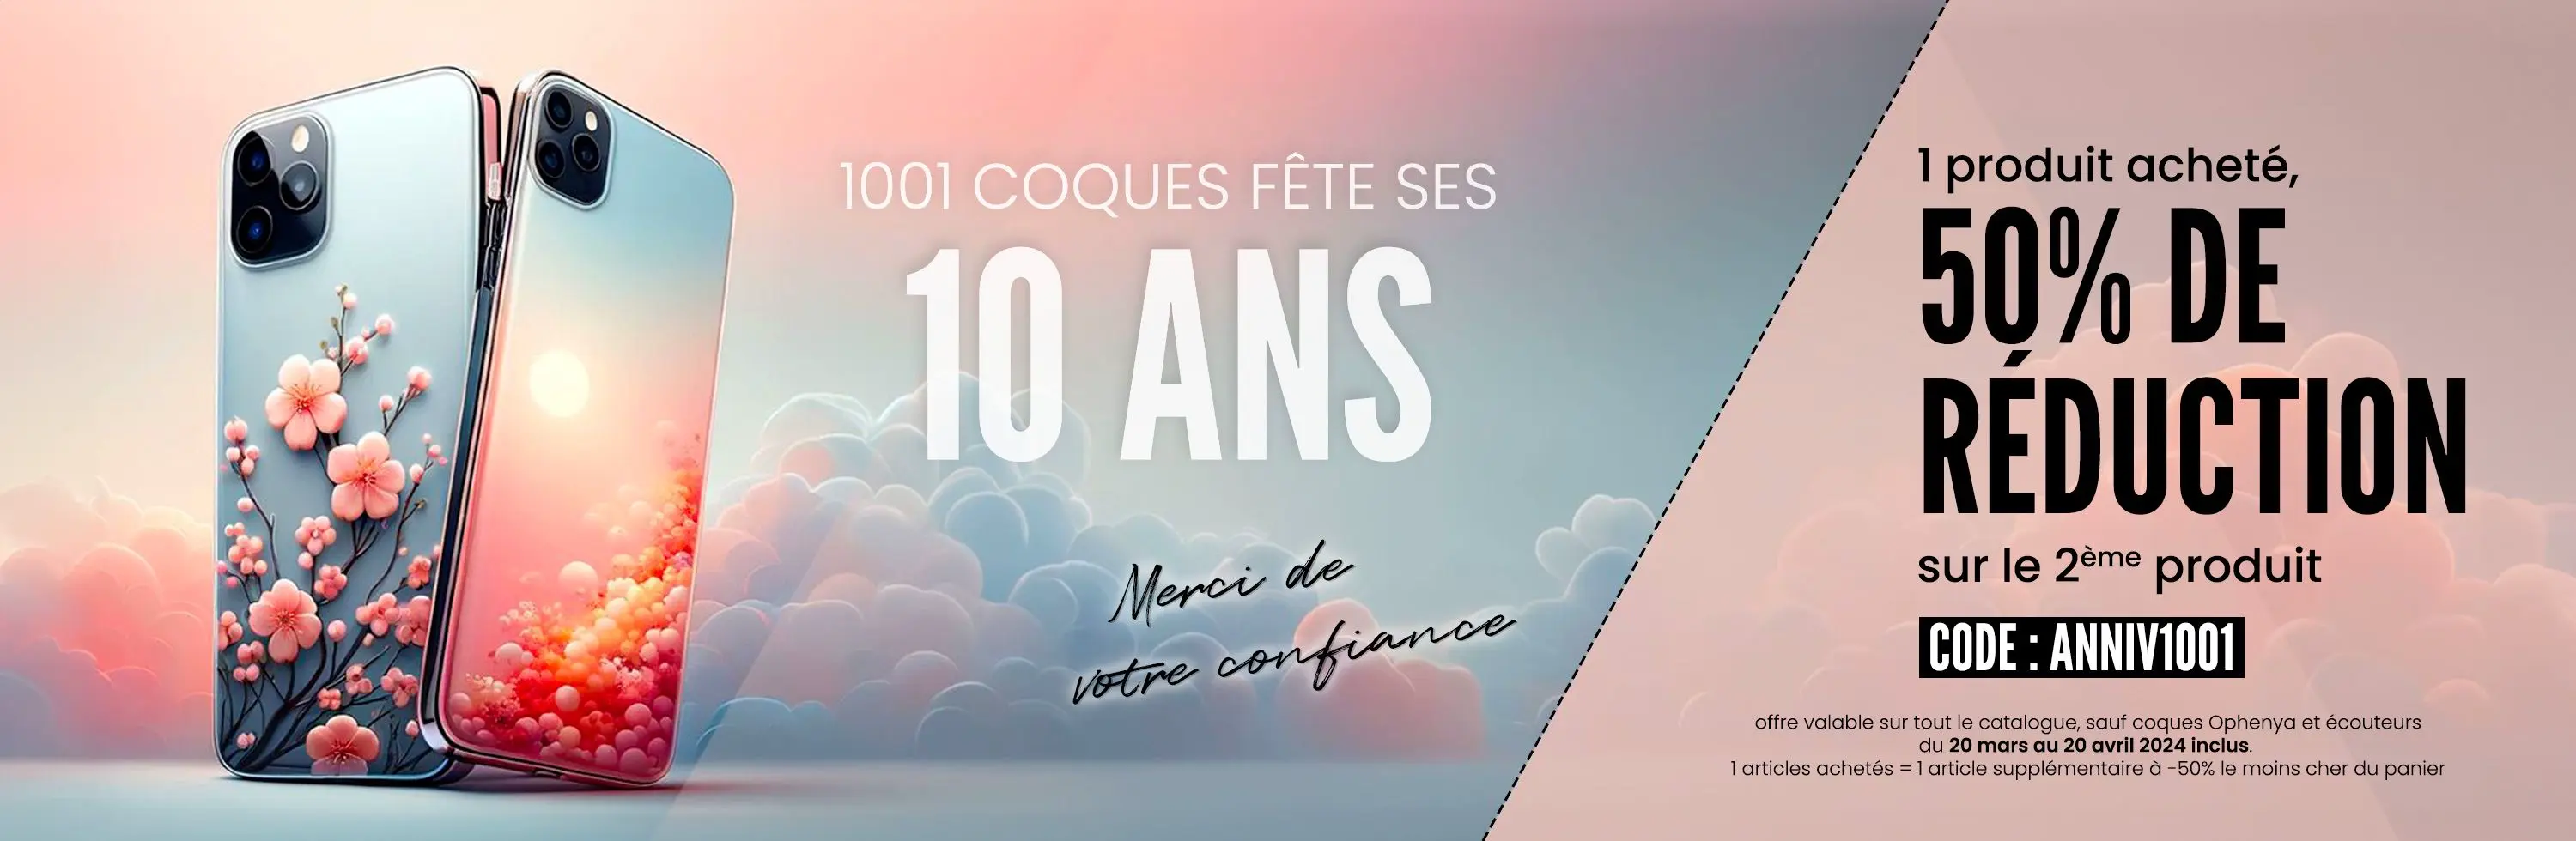 Promotion 1001 coques